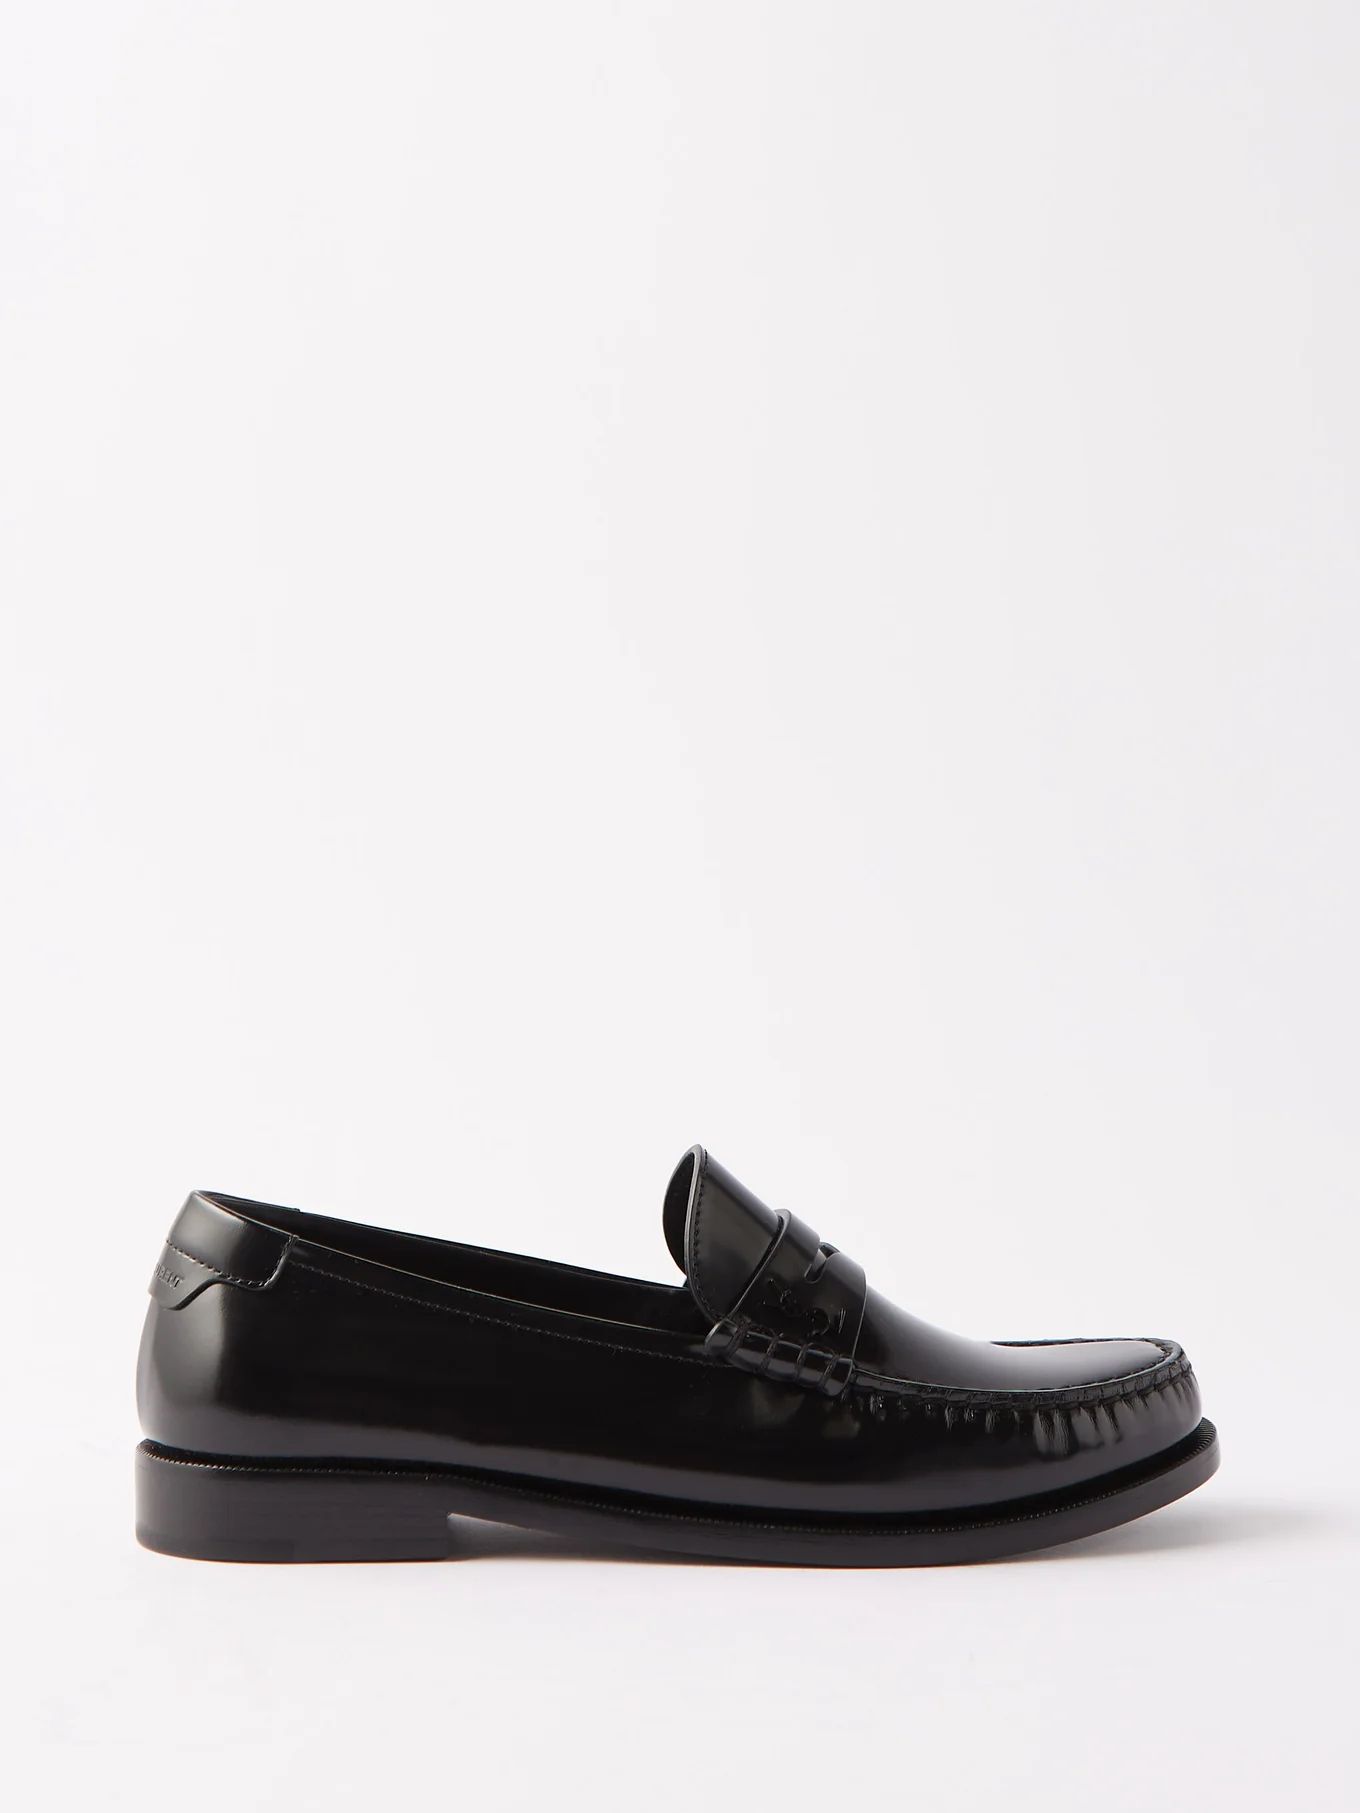 Le Loafer leather penny loafers | Saint Laurent | Matches (UK)